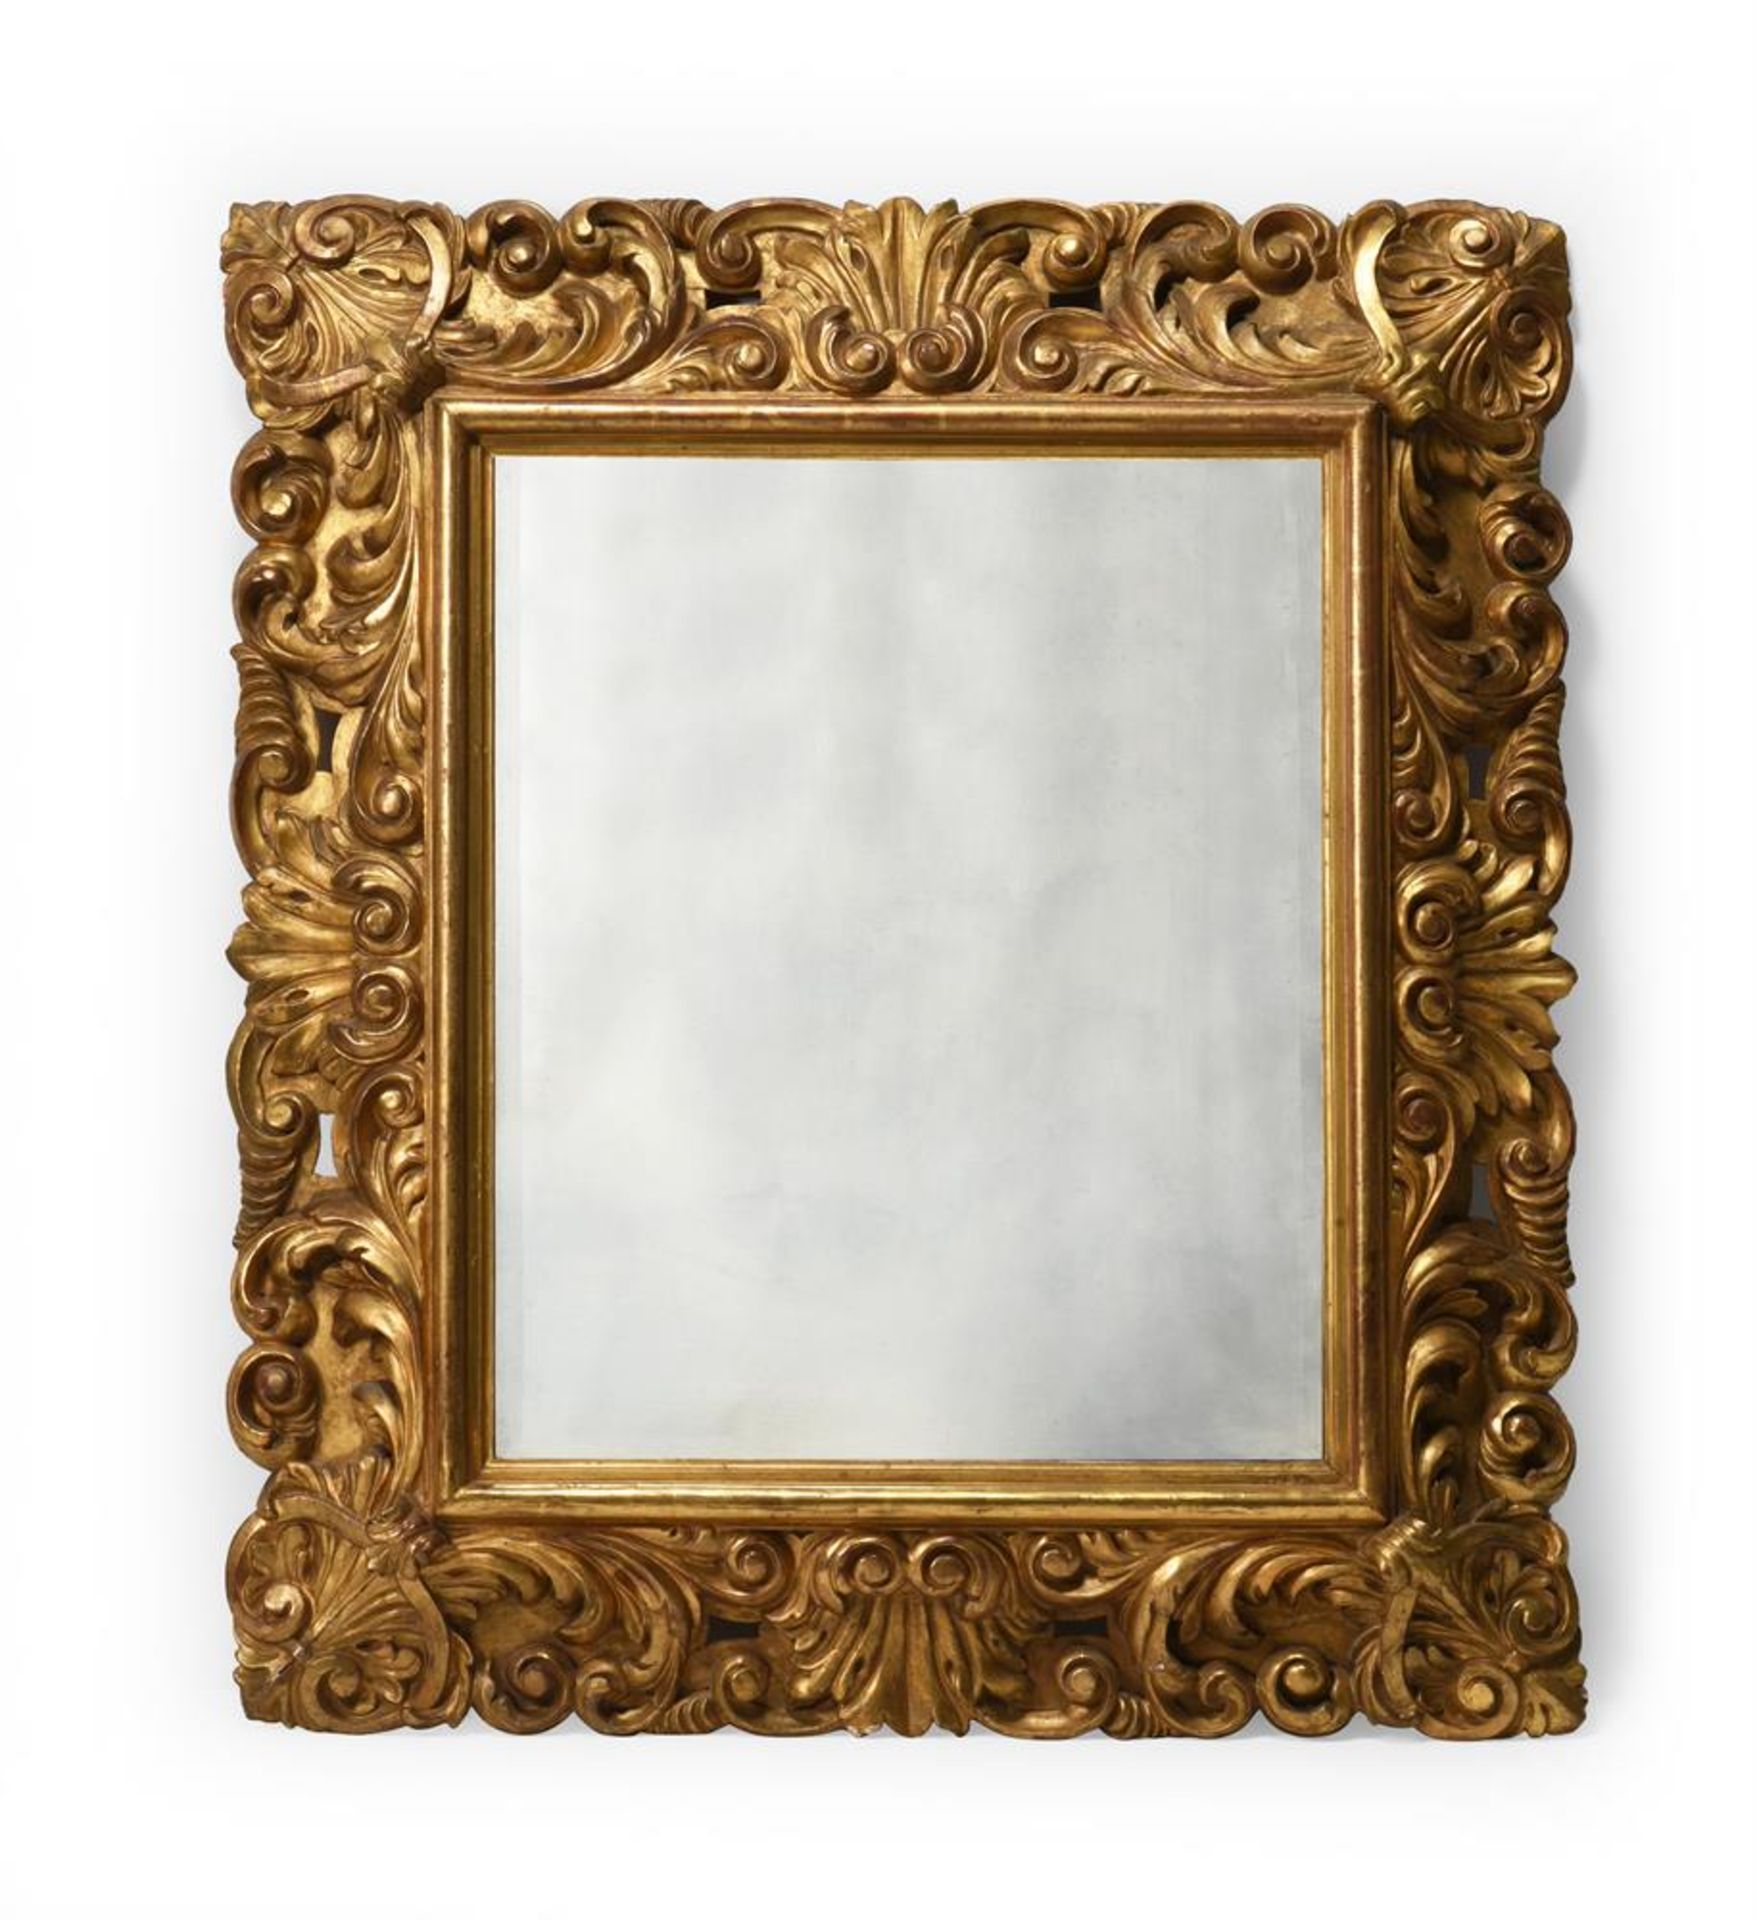 A GILTWOOD CARVED WALL MIRROR, POSSIBLY CONTINENTAL, CIRCA 1840